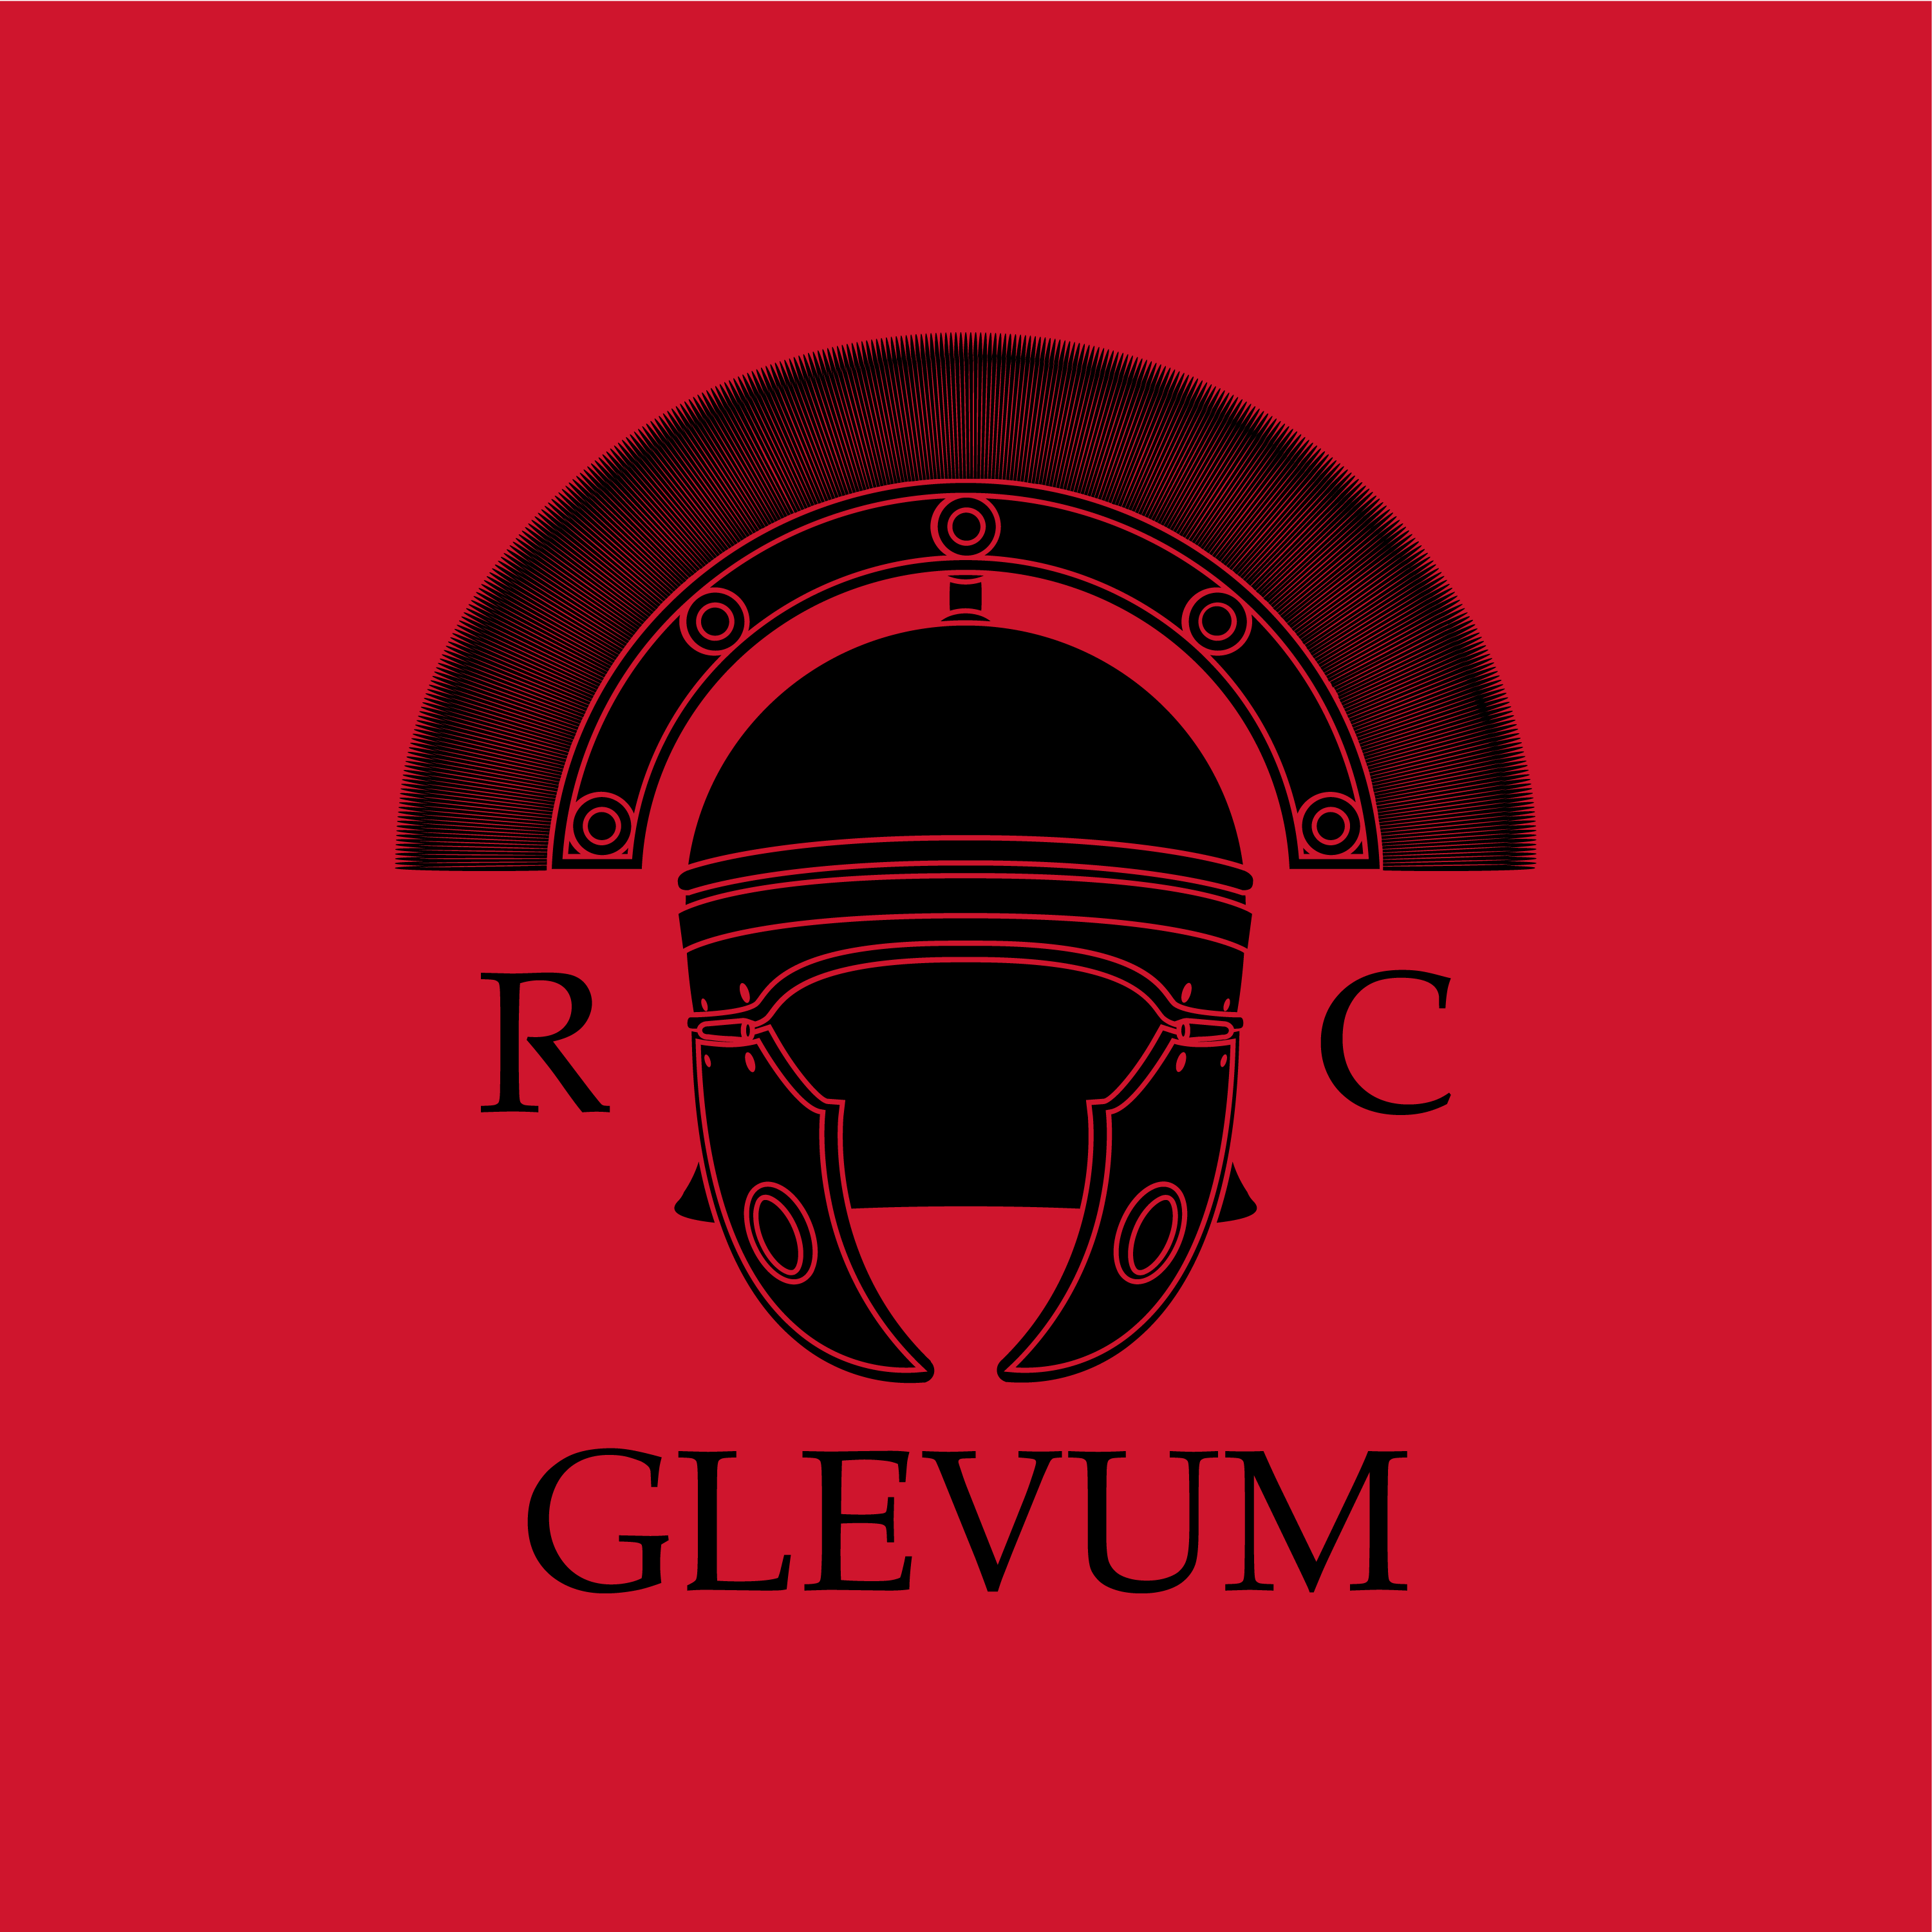 Club Image for GLEVUM RC